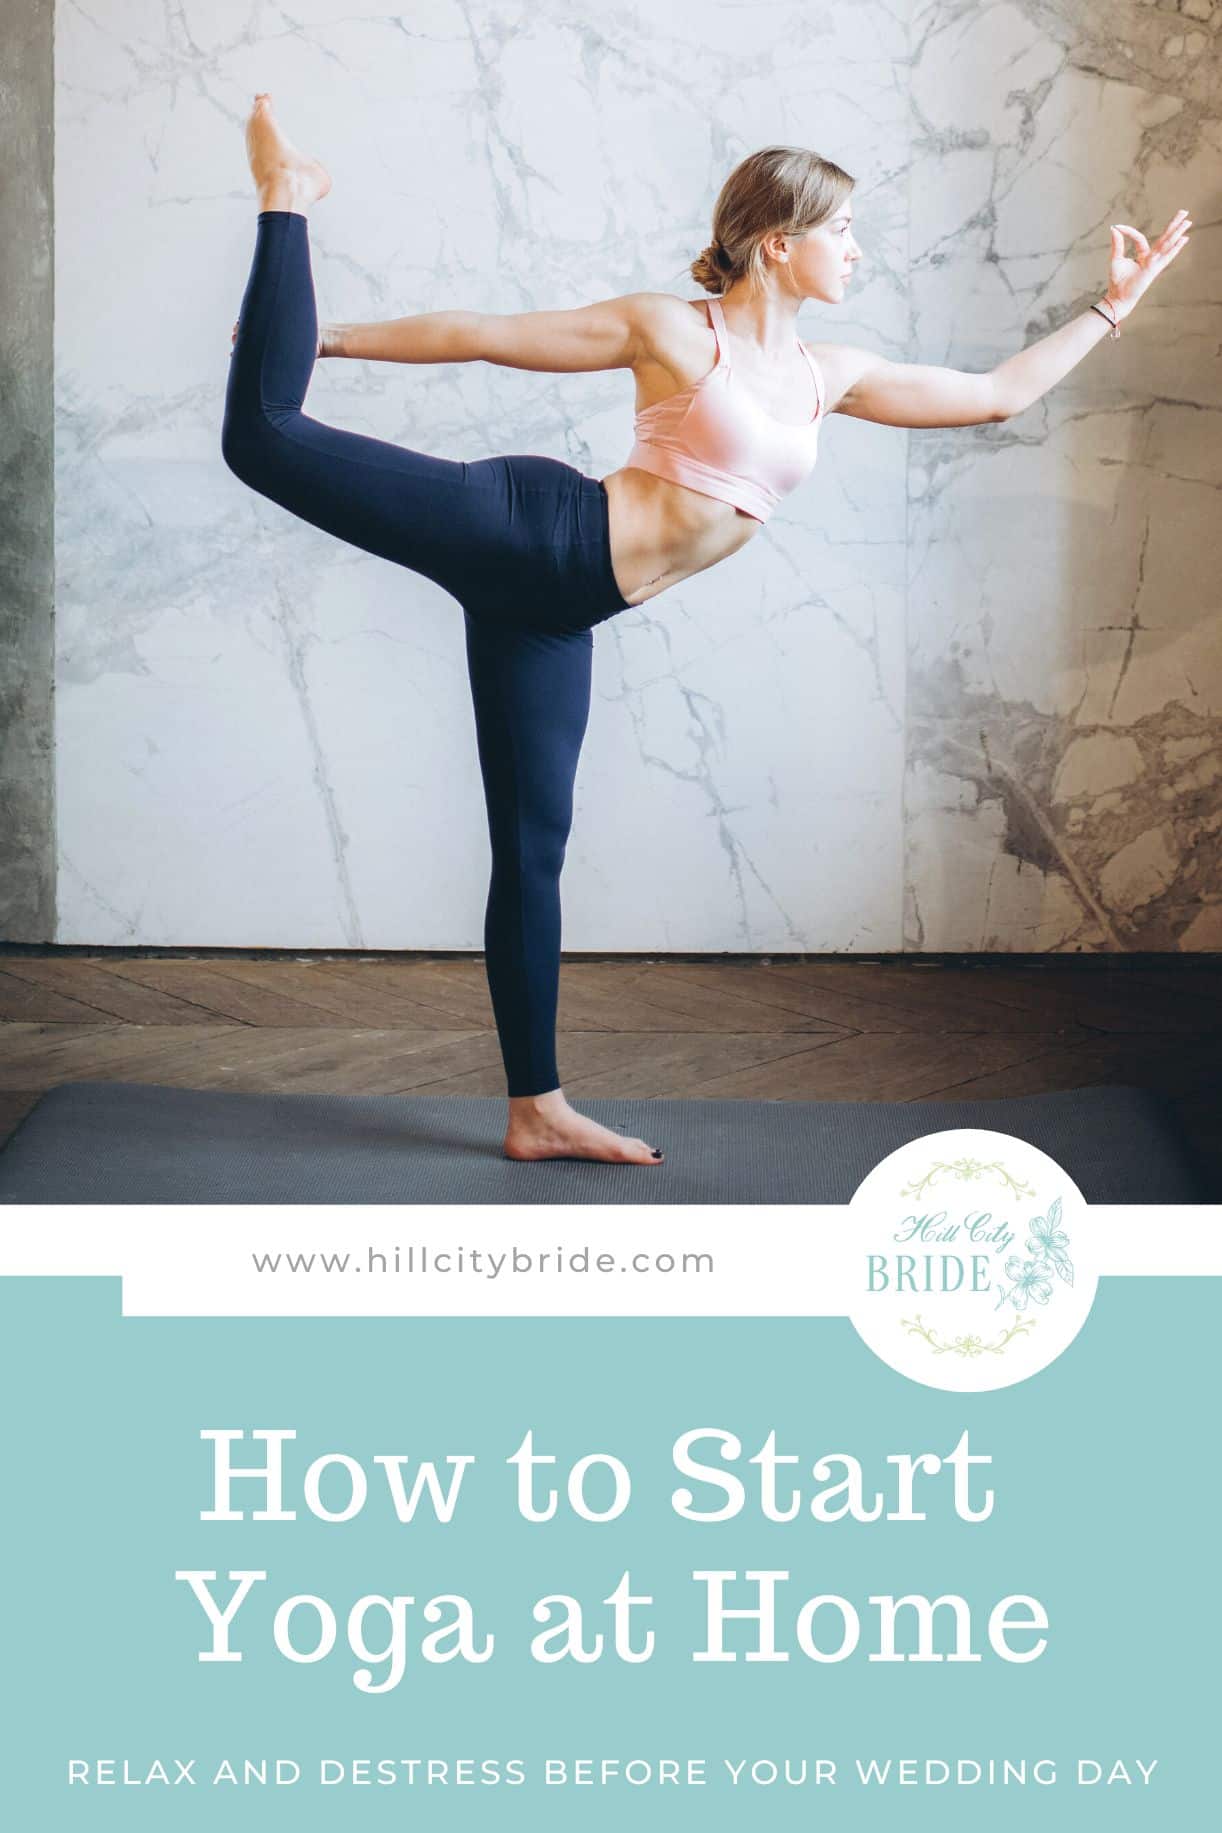 How to Start Yoga at Home